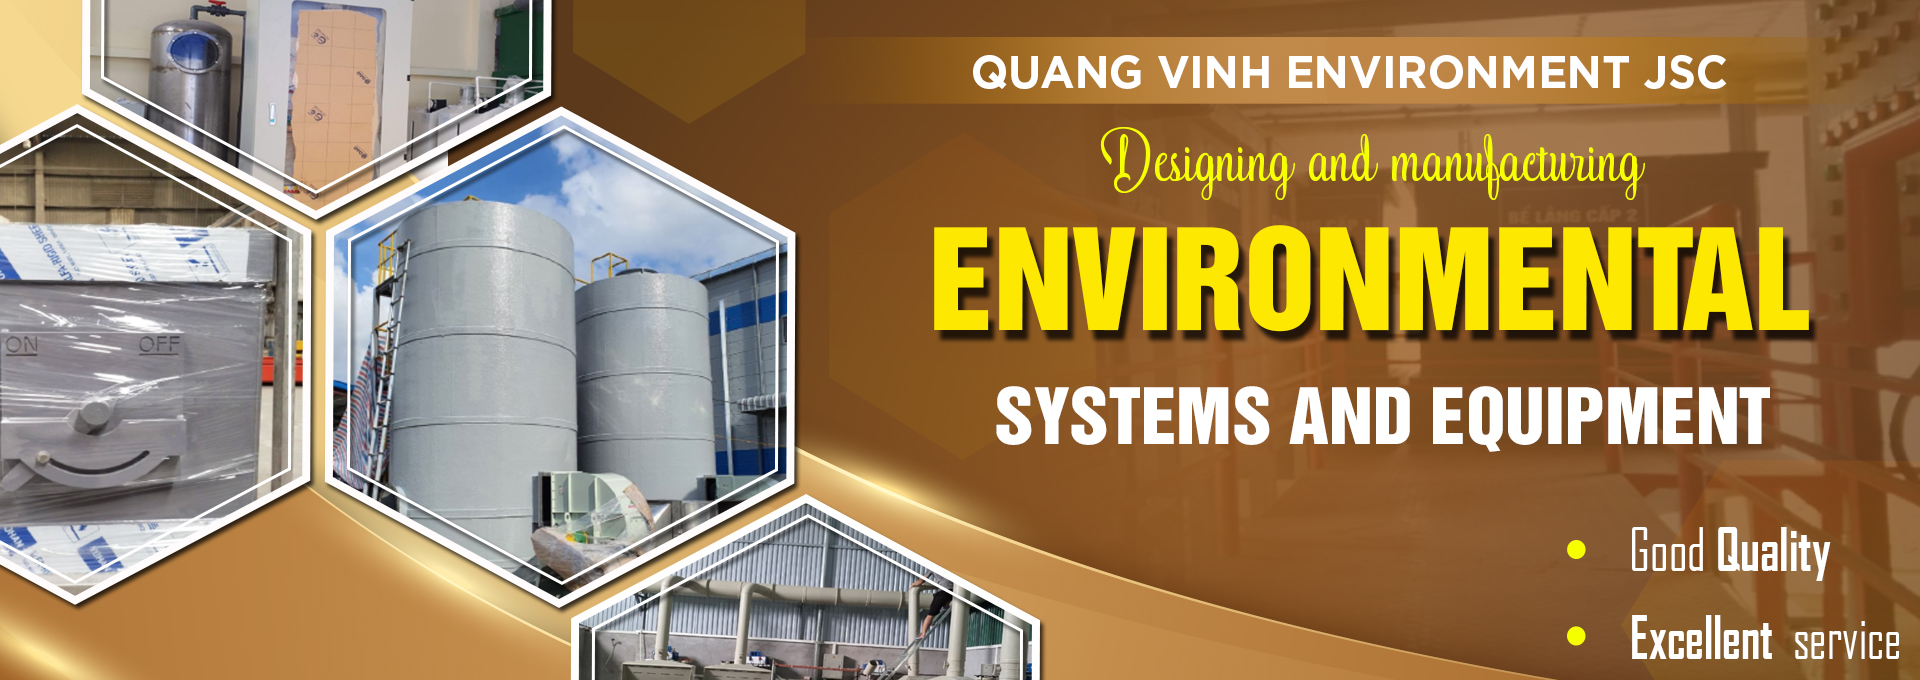 QUANG VINH JOINT STOCK COMPANY